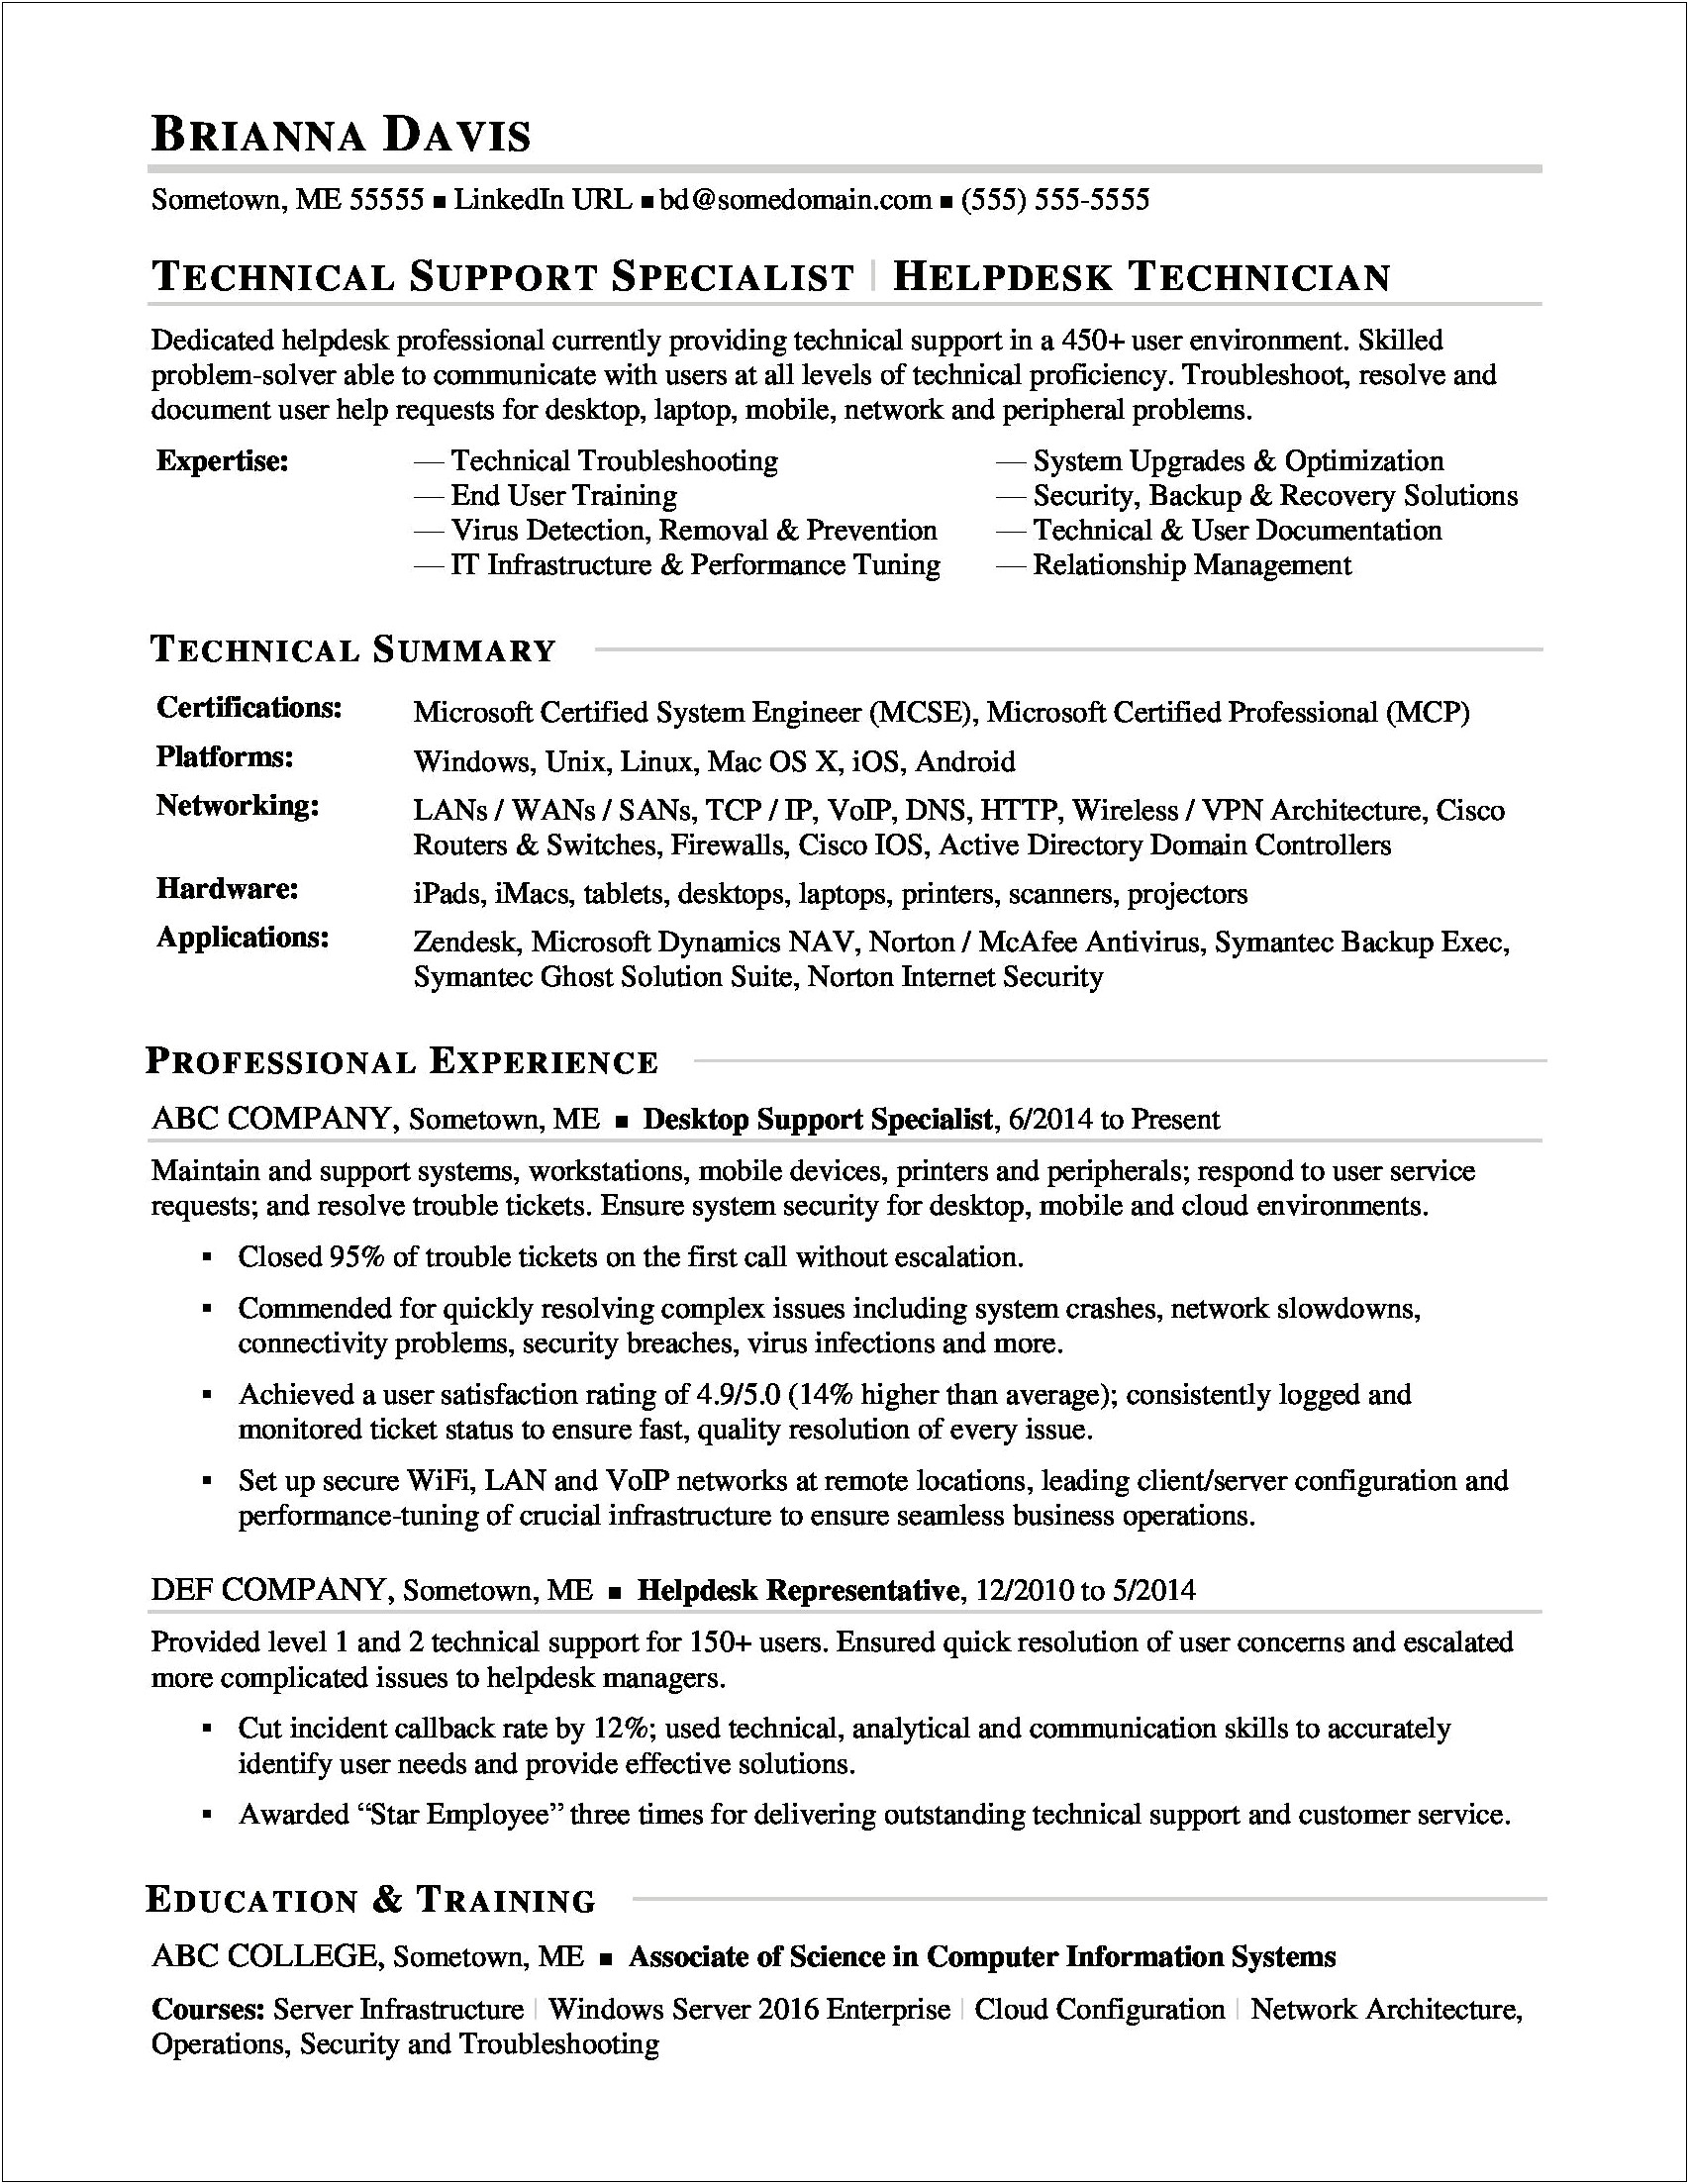 Technical Support Analyst Resume Example